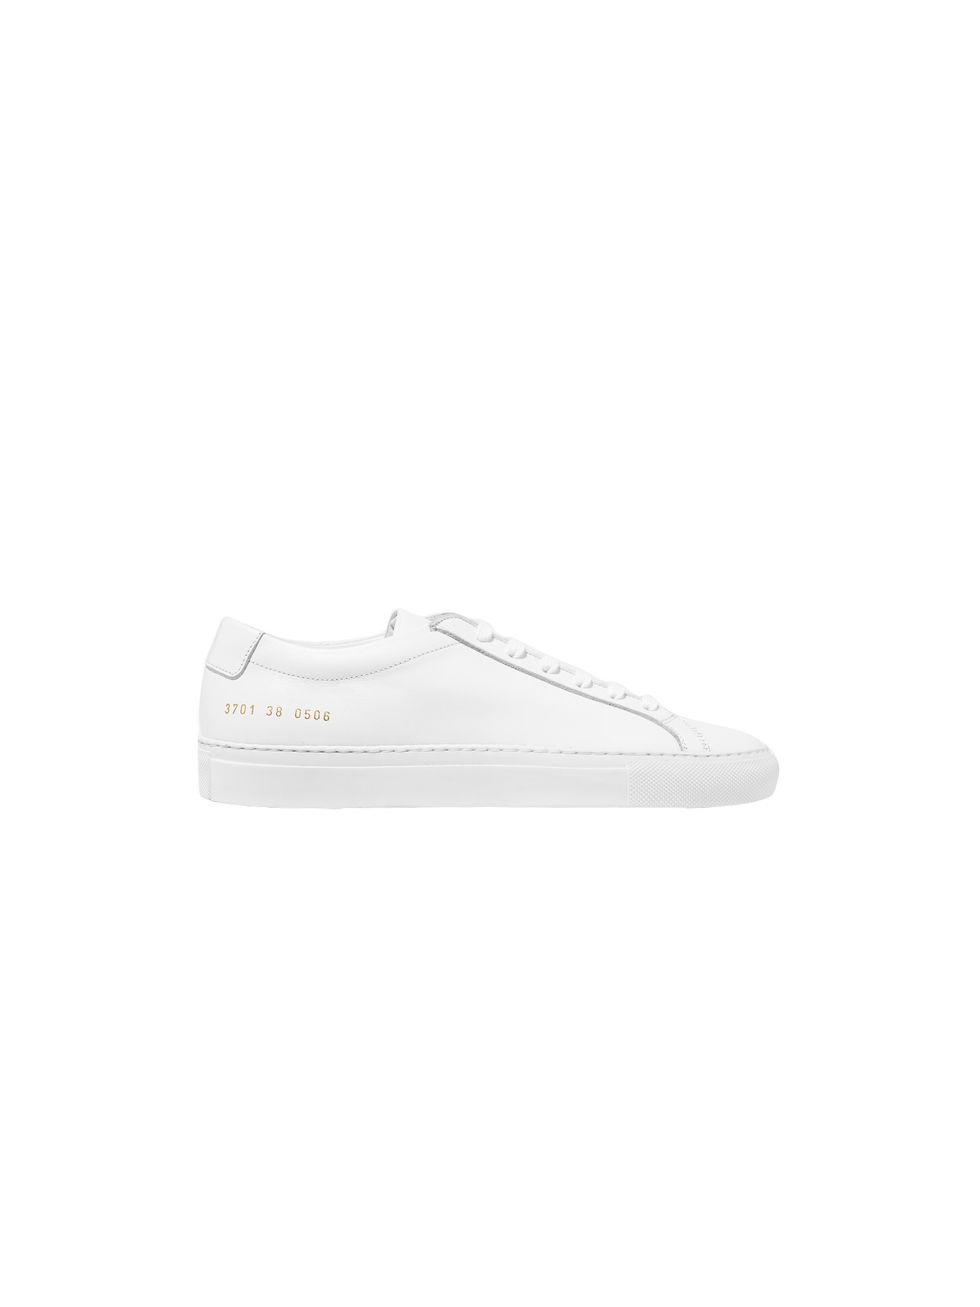 common-projects-1521669696.jpg